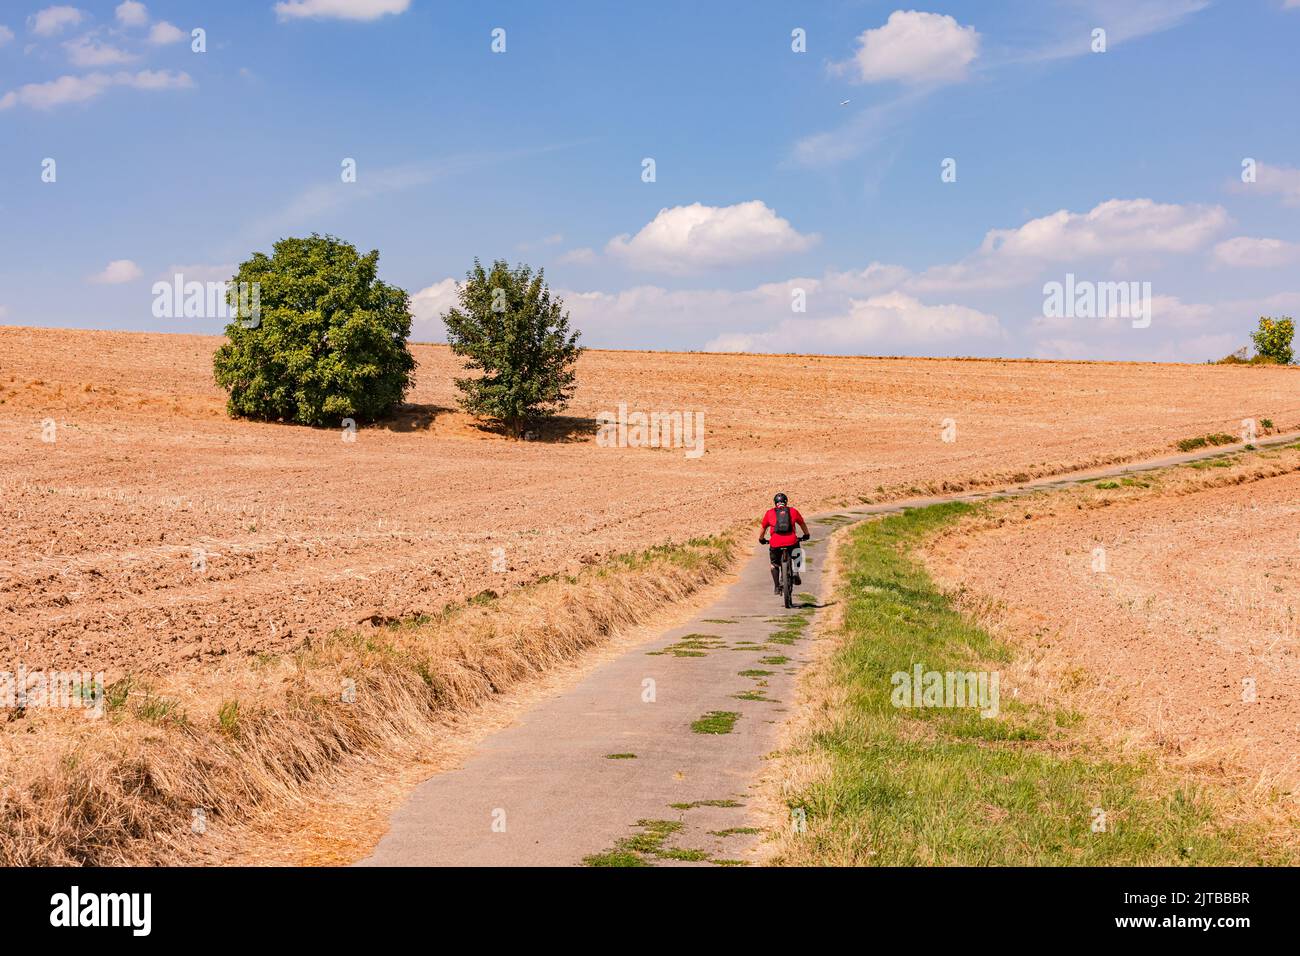 Cyclist with e-bike riding on lonely dirt road up hill through dried up fields and two trees, Germany Stock Photo